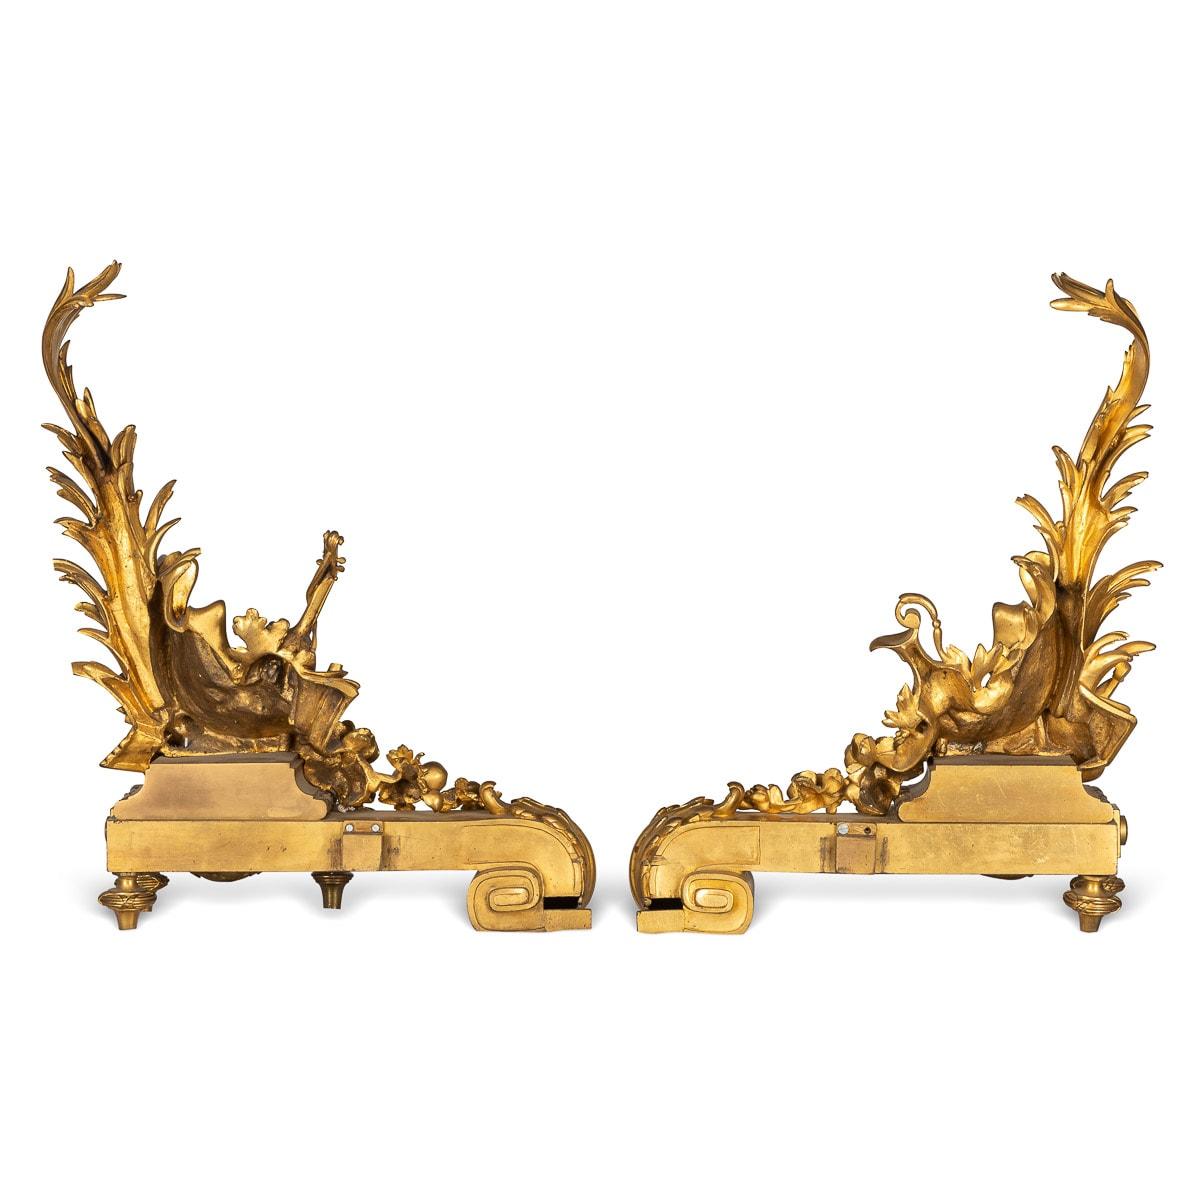 Antique 19th Century French beautifully cast pair of gilt bronze fireplace chenets. These chenets are adorned in themes of leisure, music, art and wine amongst beautiful floral scrolls, garlands and swags.

CONDITION
In Great Condition, wear